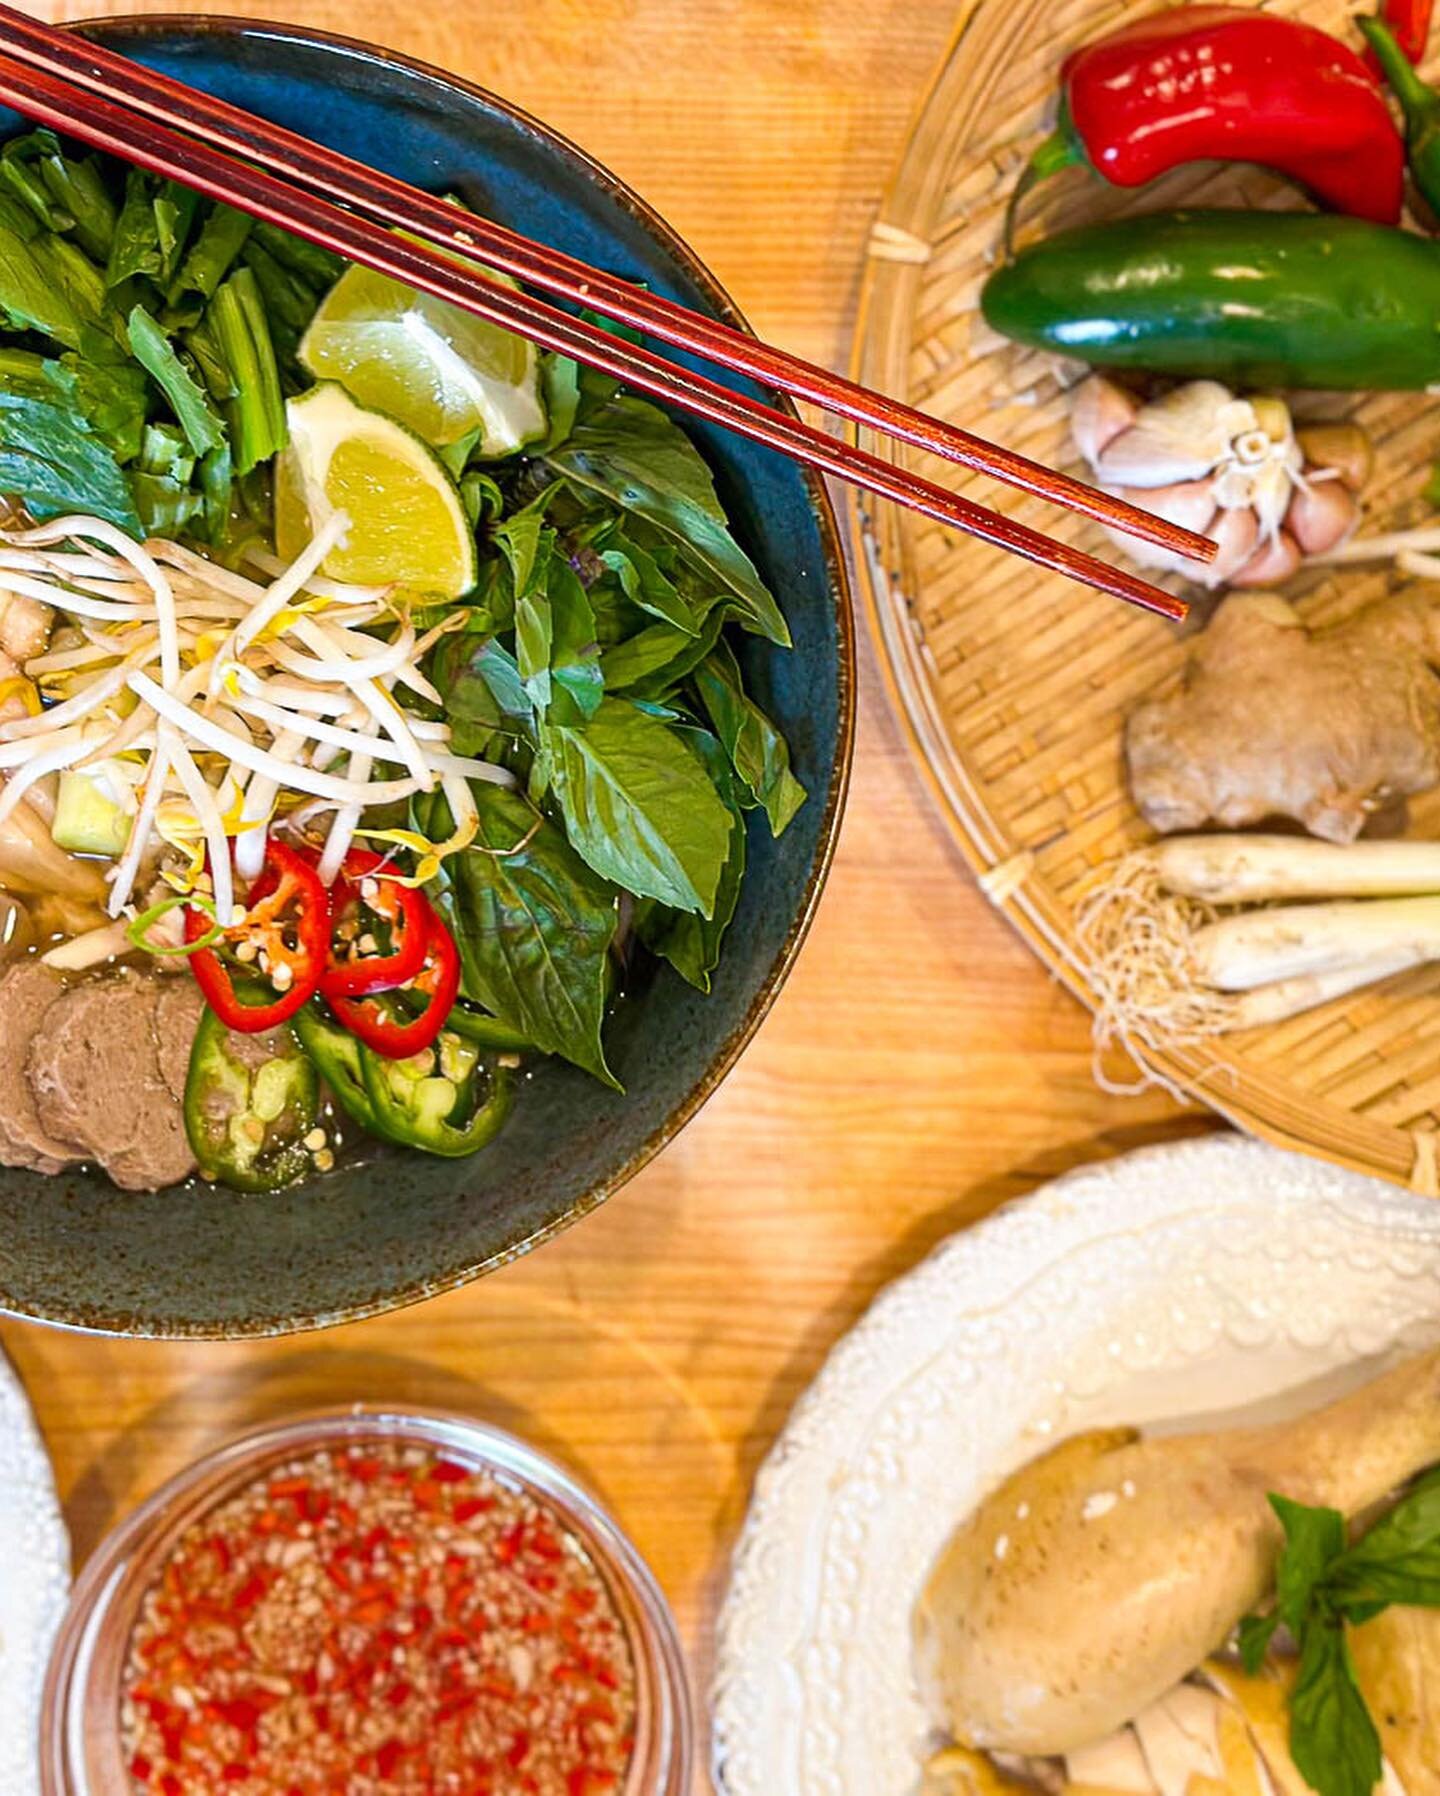 Learn how to make pho with Chef Thach Tran! We are making pho ga (chicken pho) and a vegetarian pho, ginger nuoc cham, and bo vien (beef meatballs). Buy this on-demand cooking class now to add this to your culinary arsenal. Link in bio. 

#ondemandcl